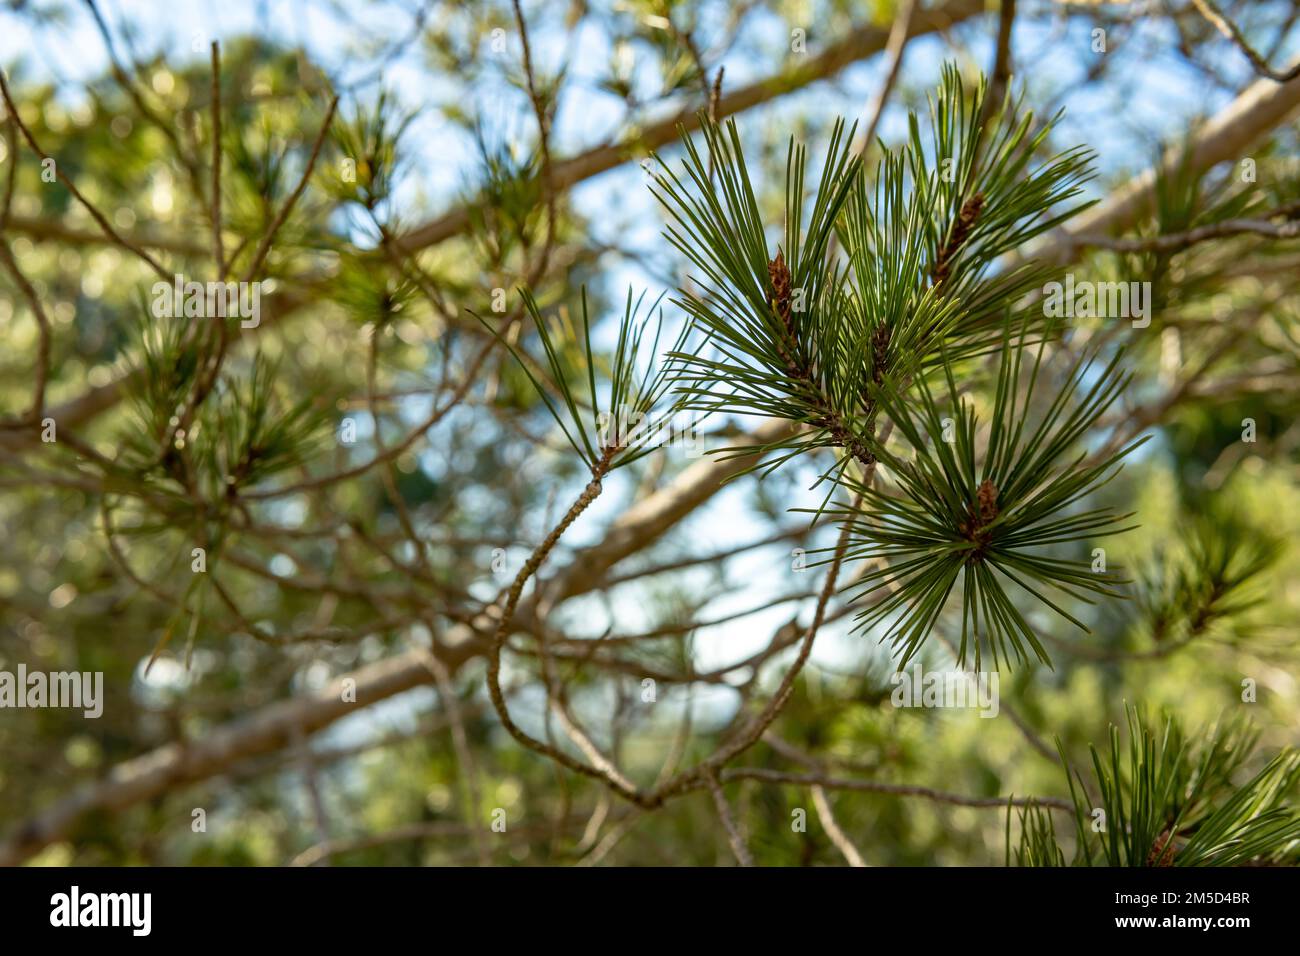 Close-up of leaves of Mediterranean pine, Pinus halepensis, at sunset on a sunny day. Island of Mallorca, Spain Stock Photo